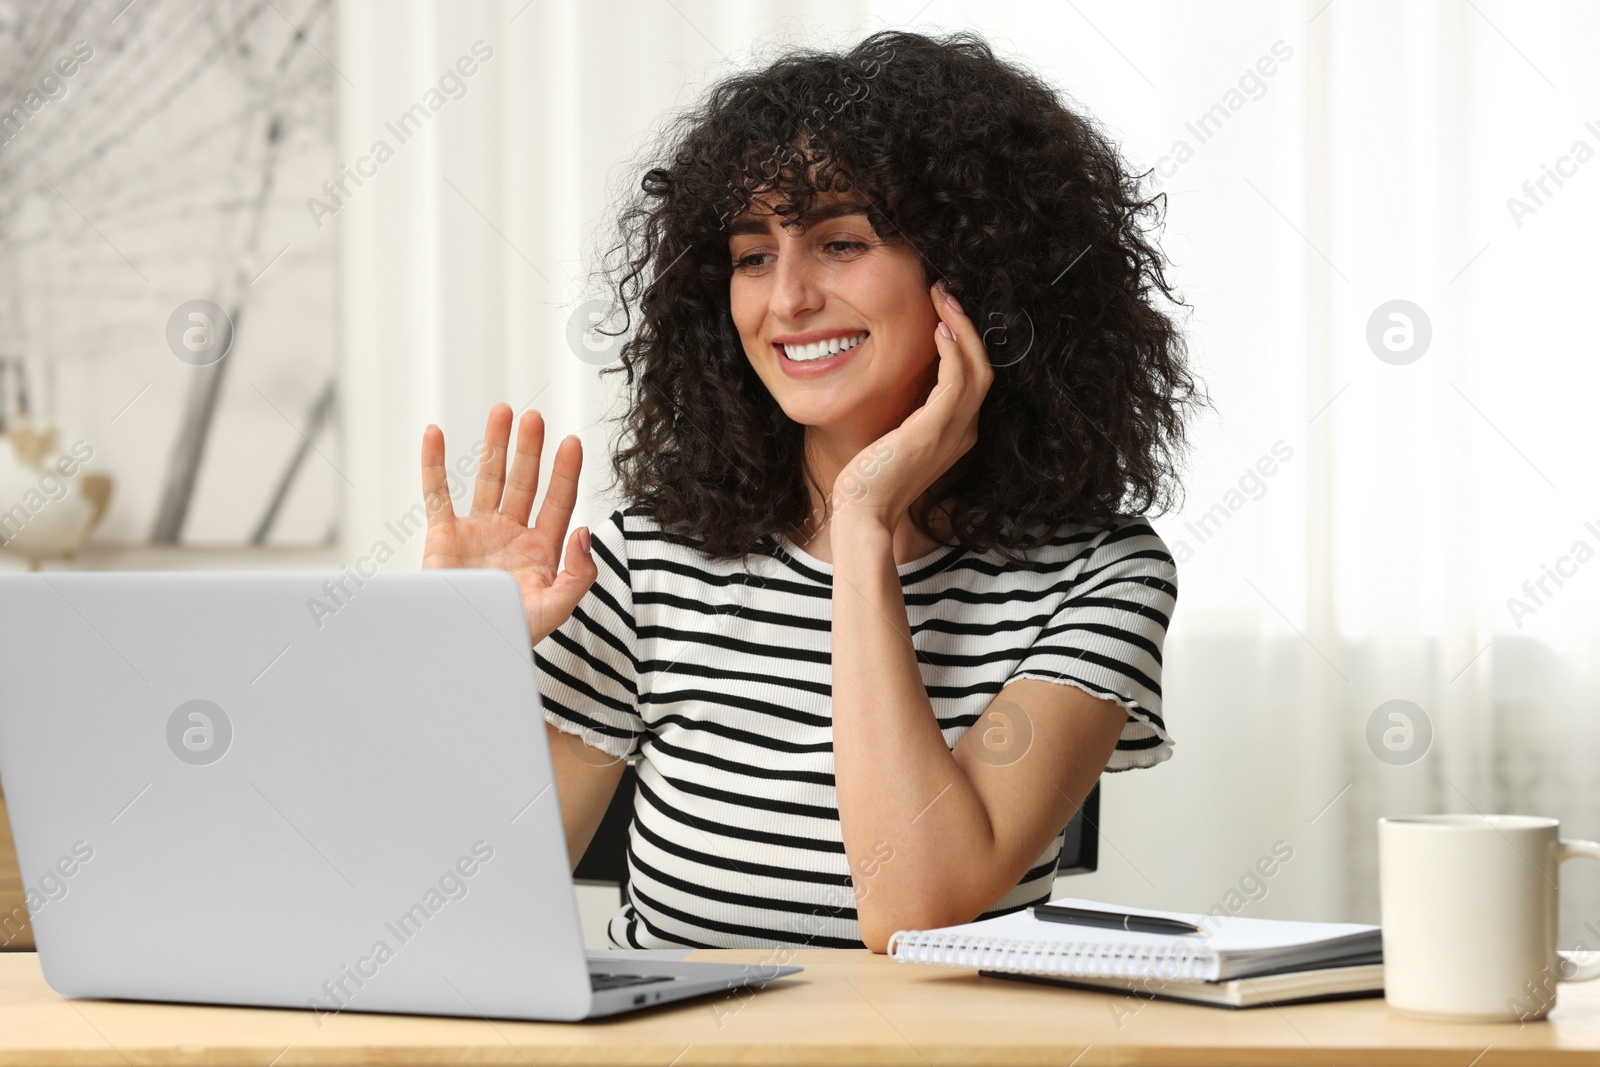 Photo of Happy woman waving hello during video call at table in room